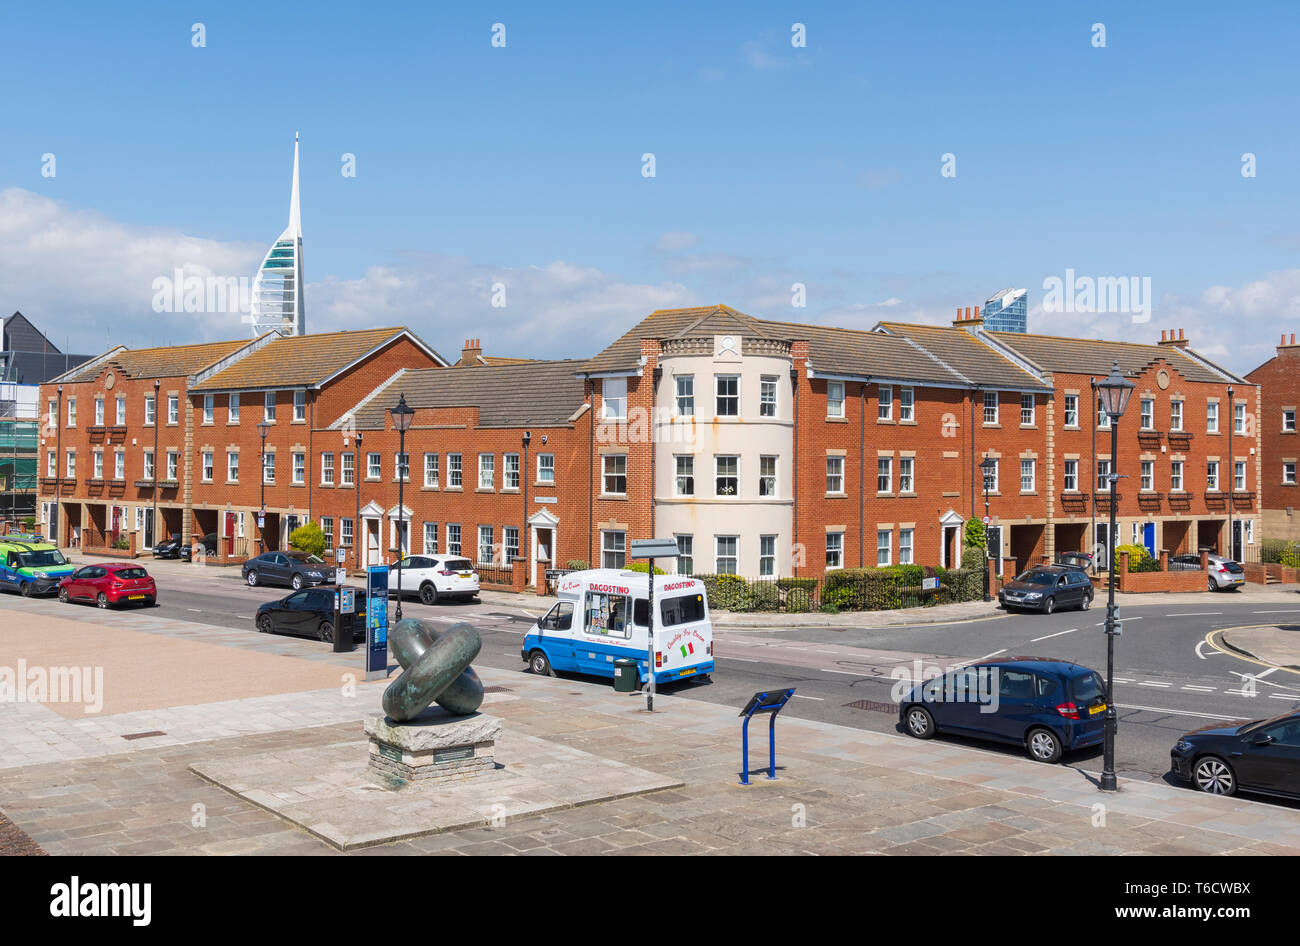 King James Terrace houses, a large corner housing terrace on a corner in Old Portsmouth, Hampshire, England, UK. Modern housing terraces. Stock Photo